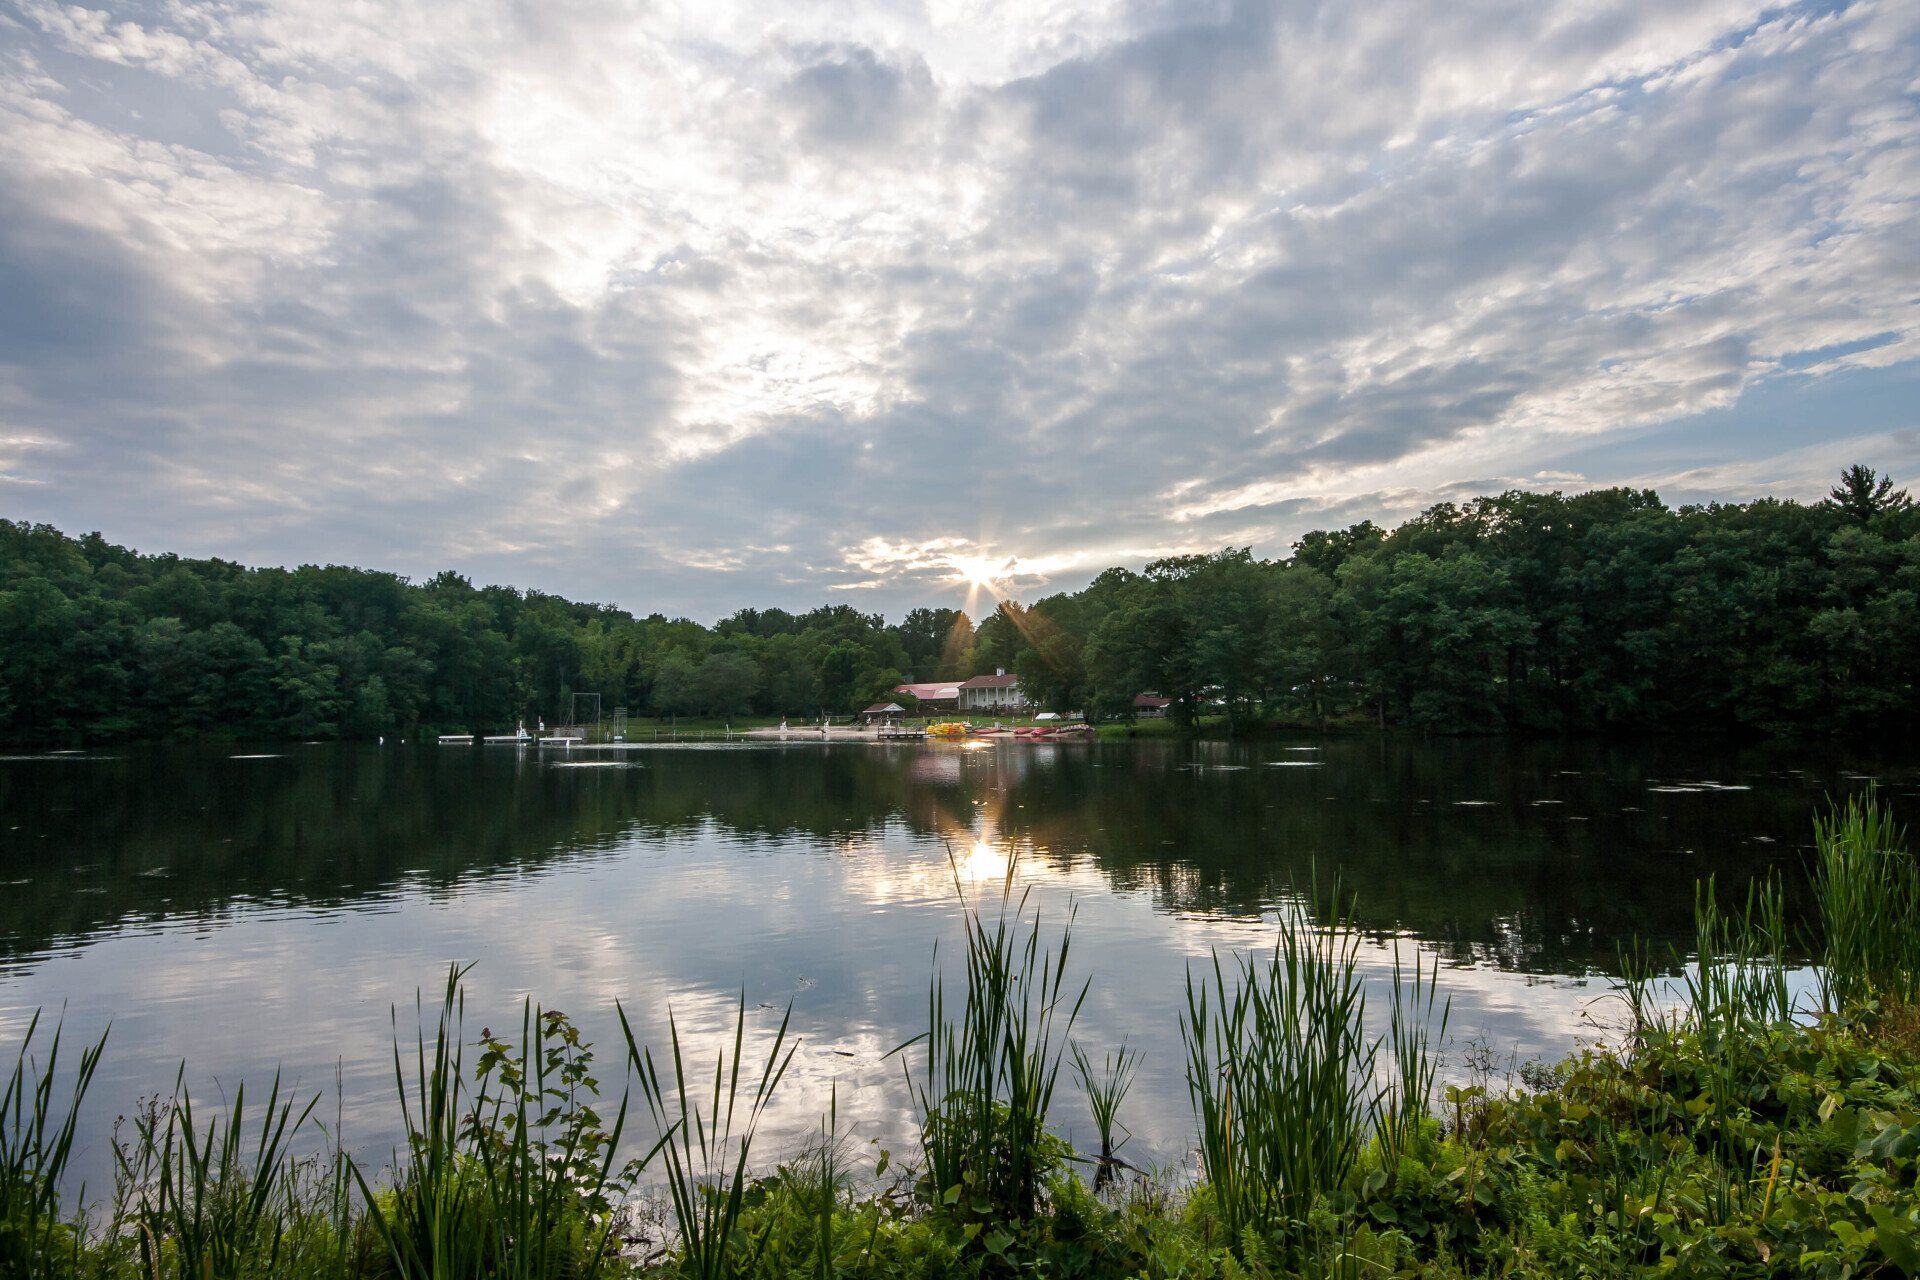 Mt Gretna Lake and Beach - Nearby Attraction of Copper Ridge New Home Community in Lebanon PA